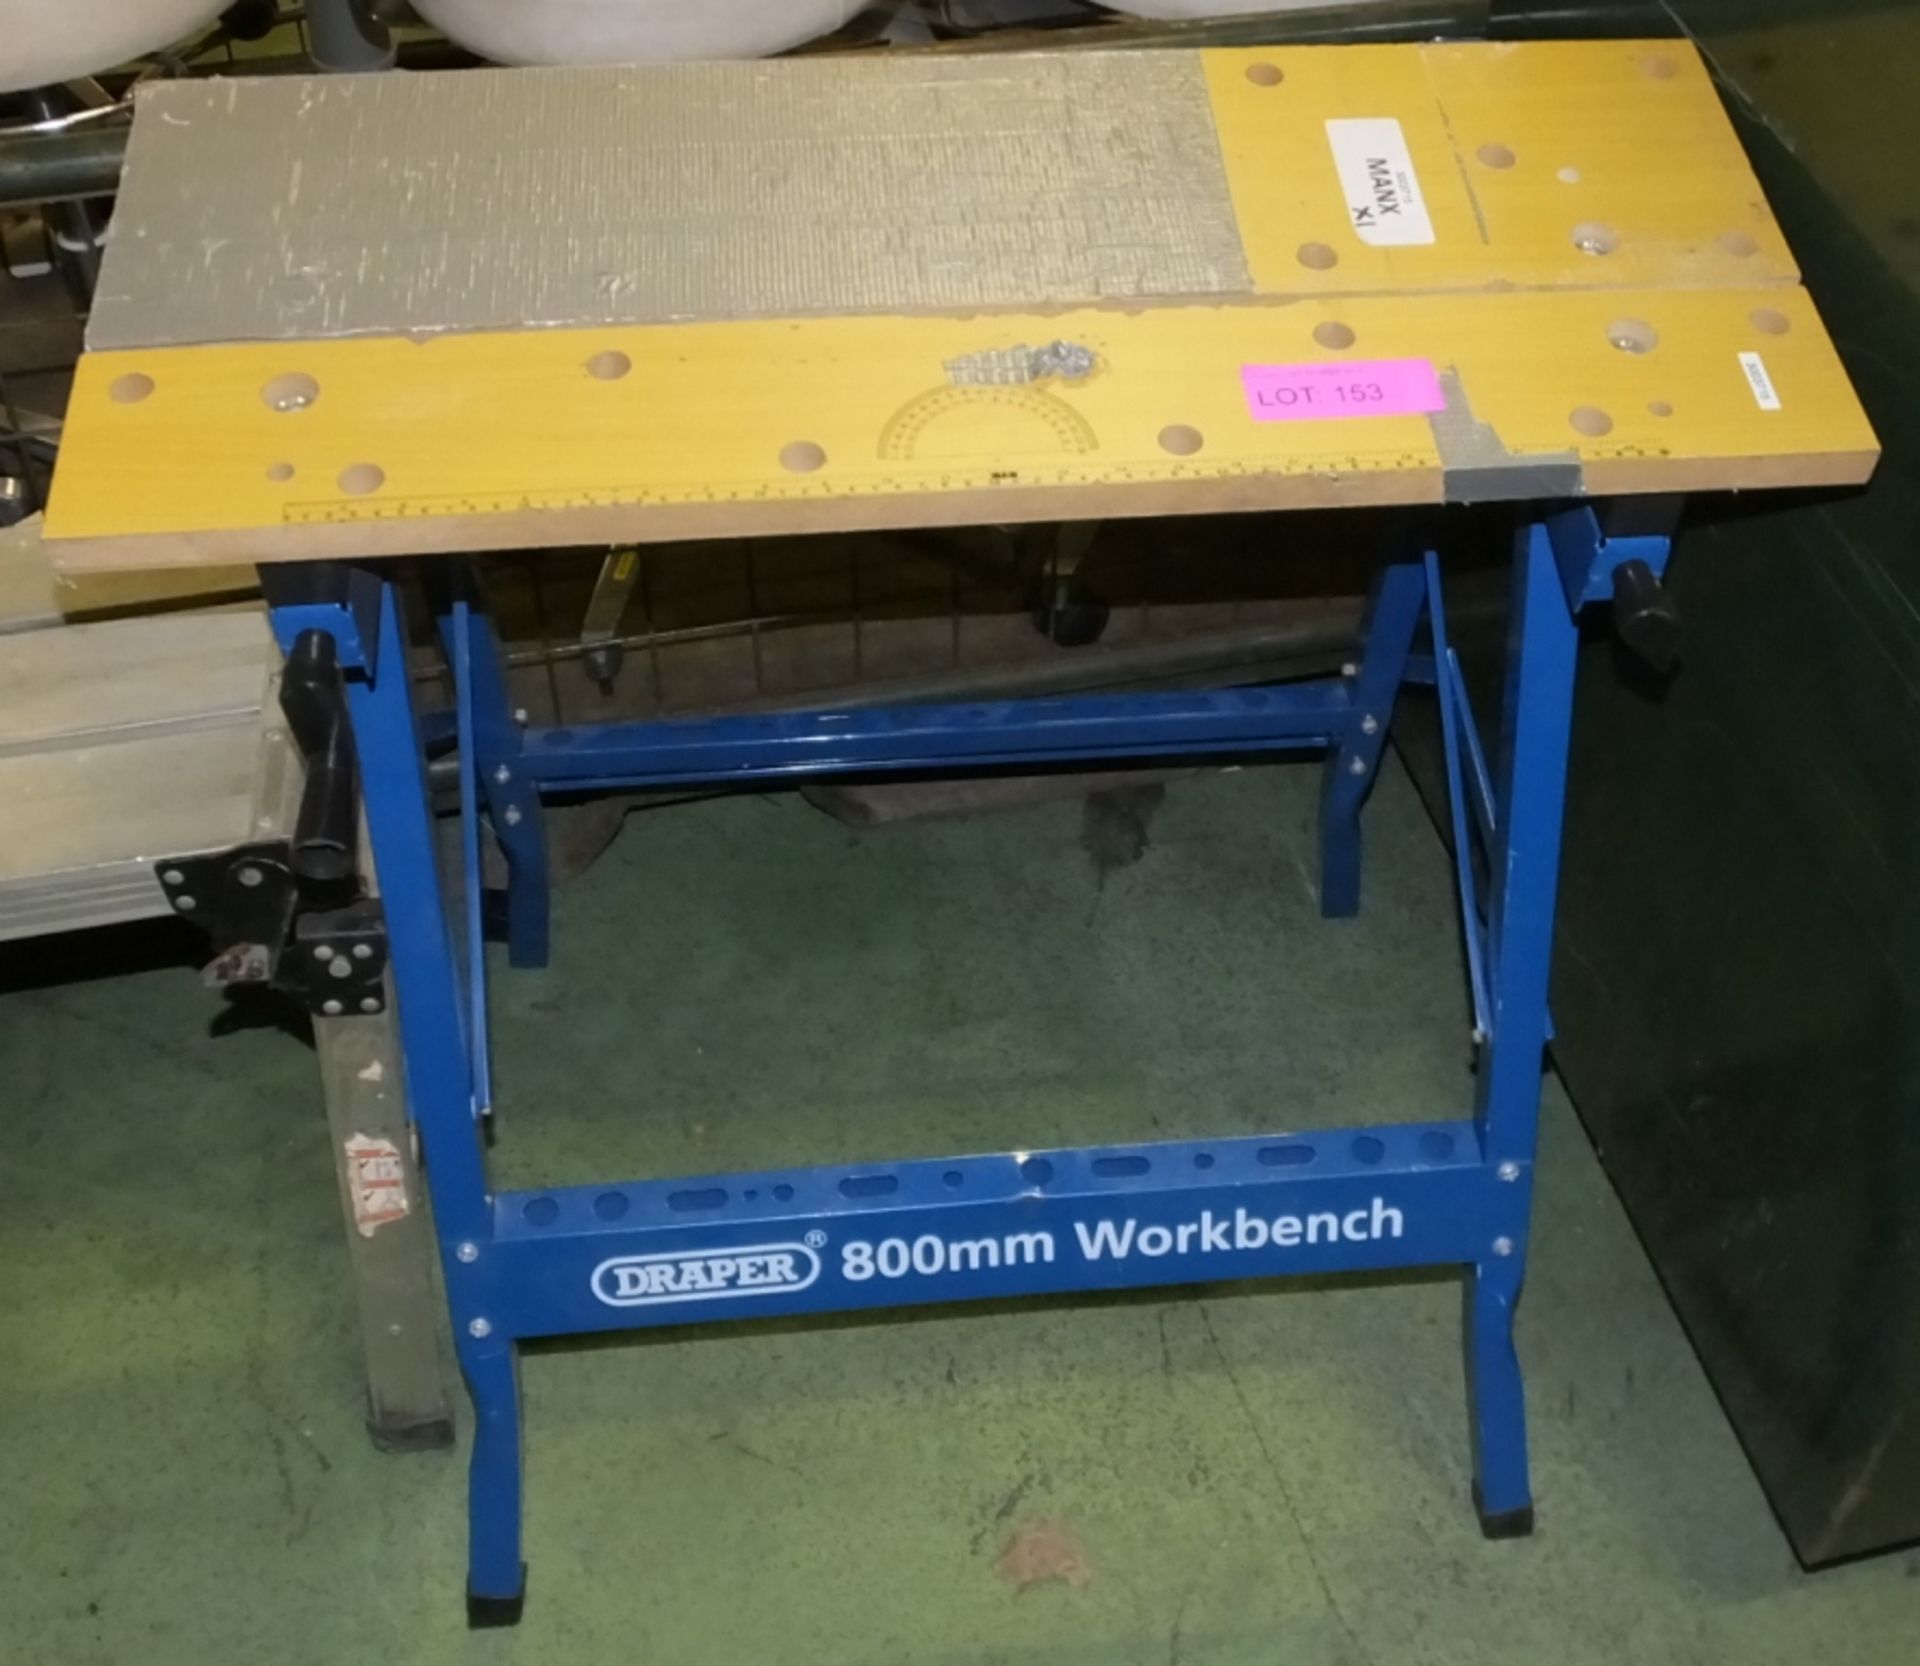 Draper 800mm Workbench - as spares